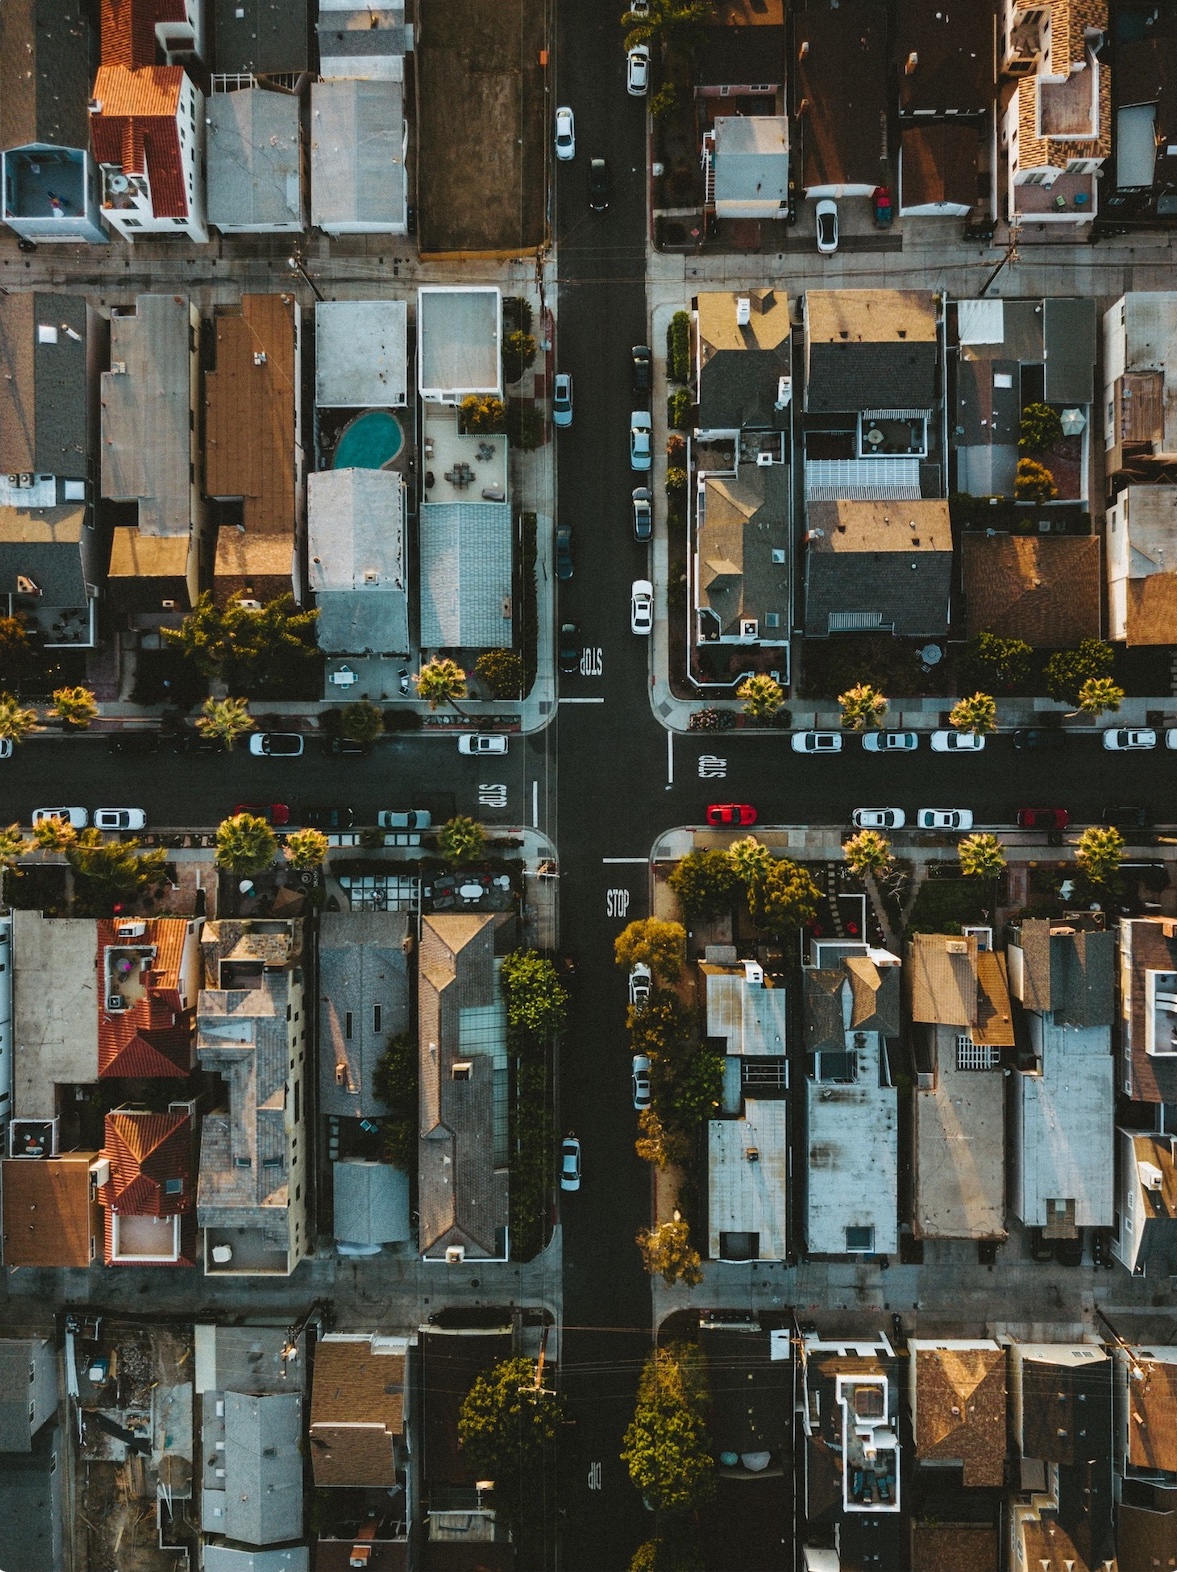 A neighborhood grid of buildings and streets as seen from above.